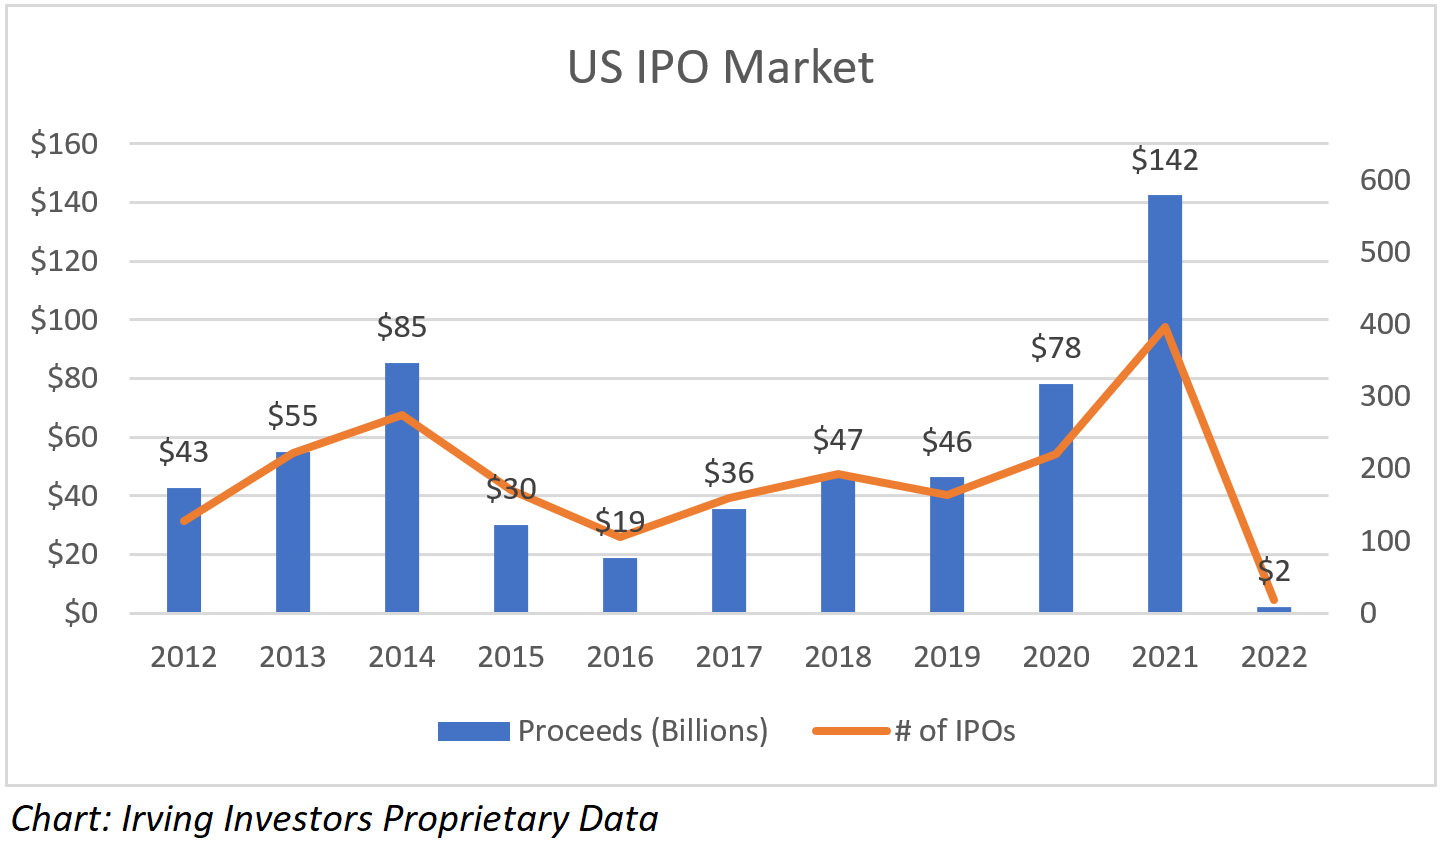 IPOs in the US market 2012-2022